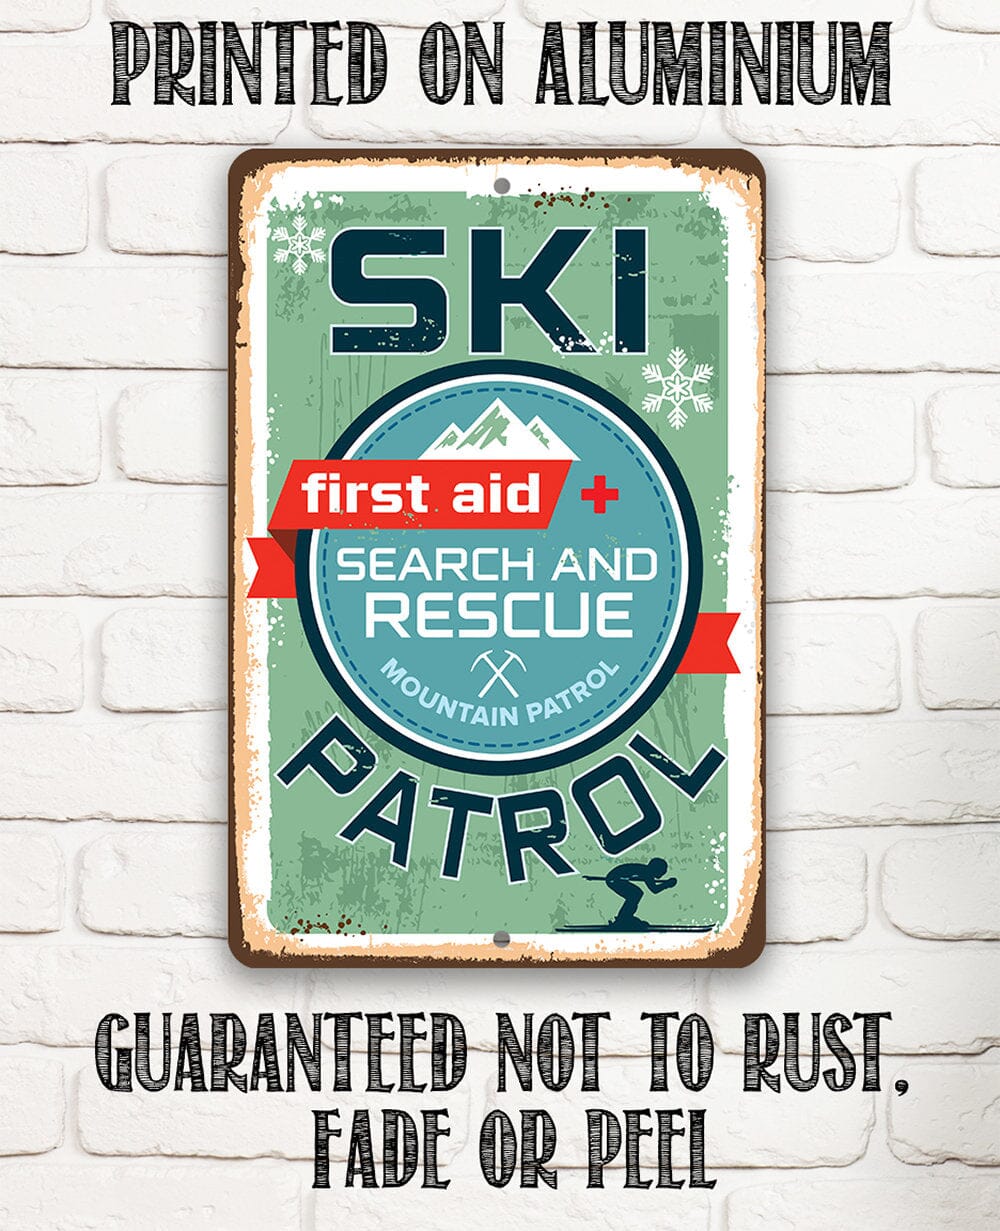 Ski Patrol First Aid Search and Rescue - Rustic Style Emergency Response Unit Sign 8" x 12" or 12" x 18" Aluminum Tin Awesome Metal Poster Lone Star Art 